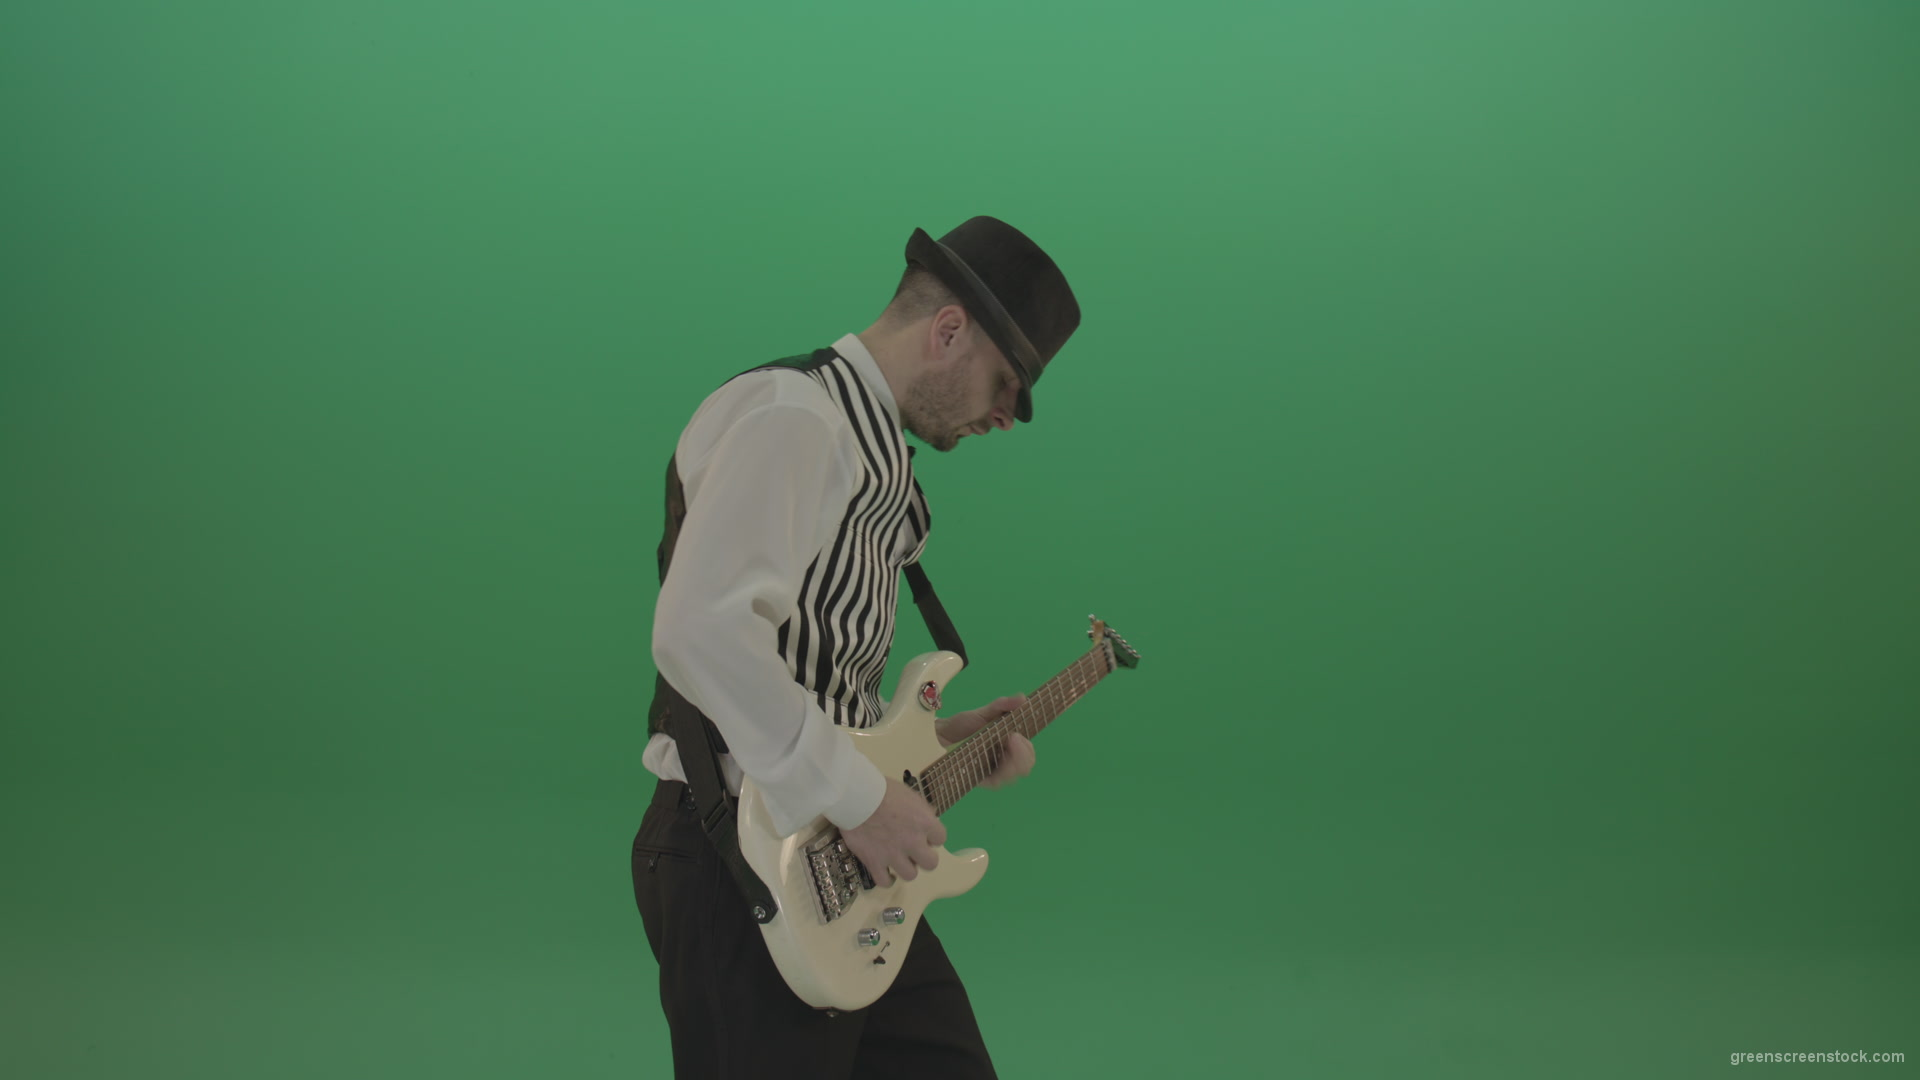 Classic-jazz-guitarist-play-white-electro-guitar-solo-music-on-green-screen_009 Green Screen Stock